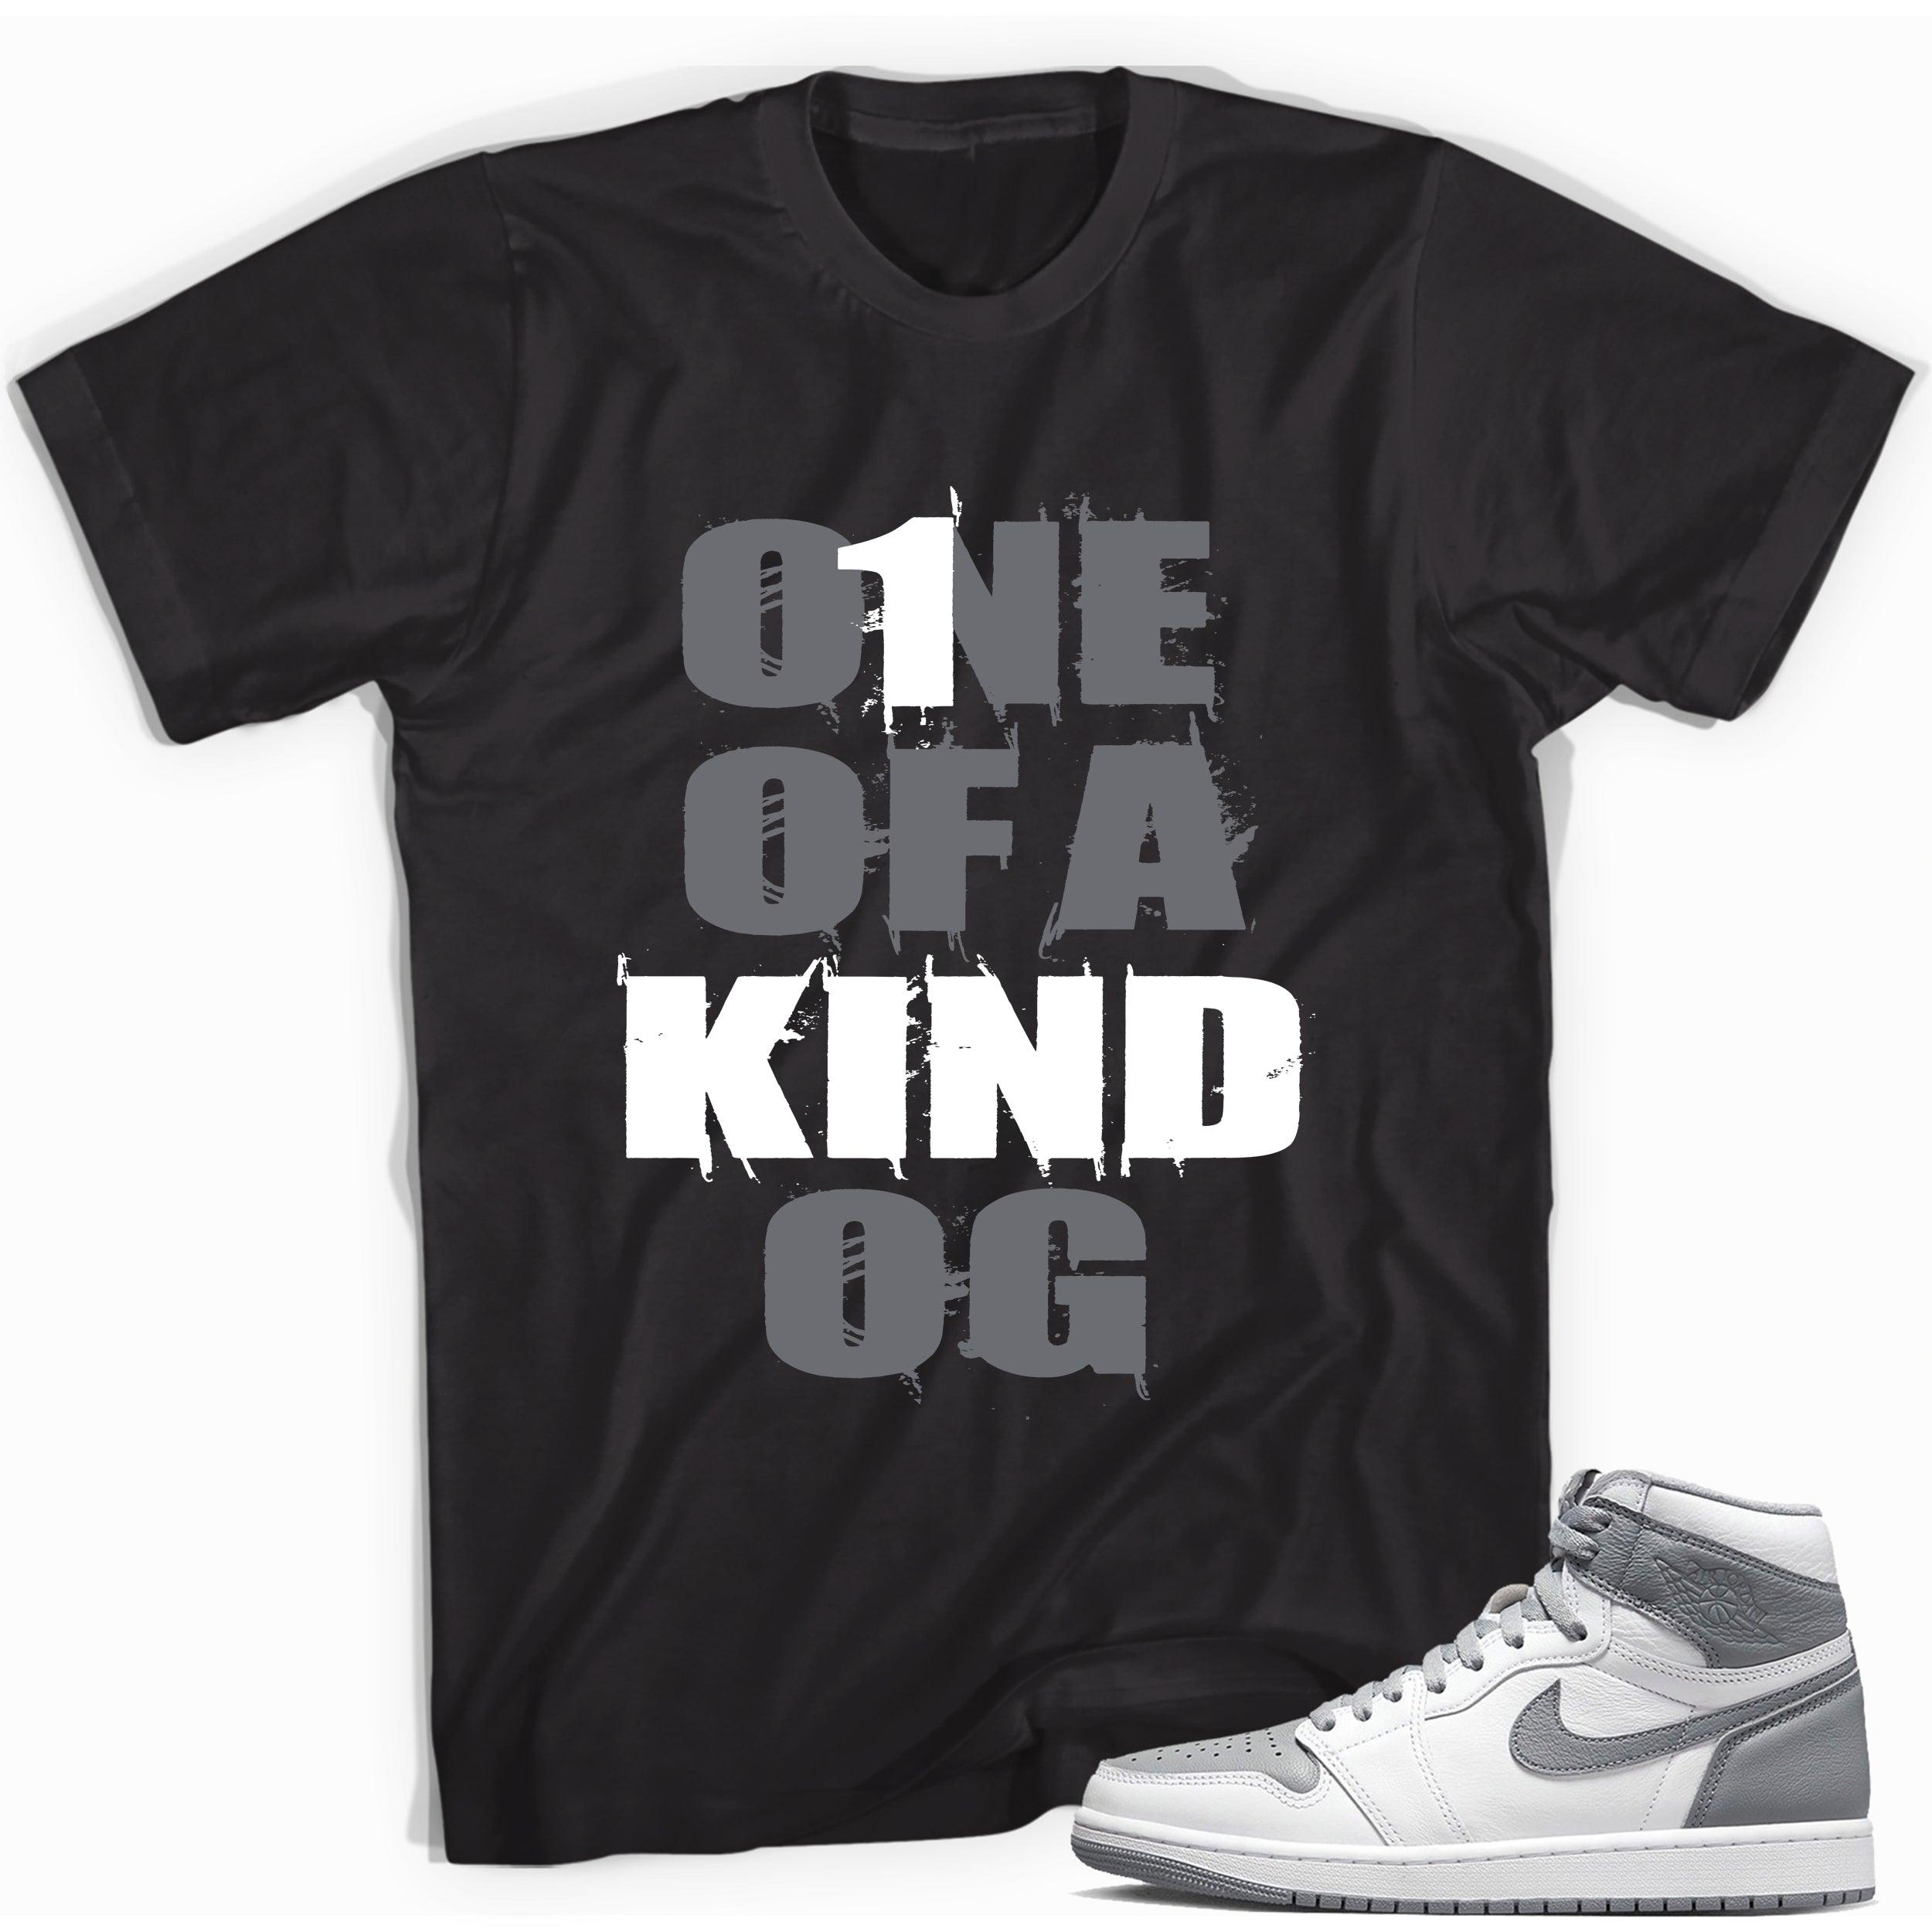 One of a Kind sneaker tee for Jordan 1s photo